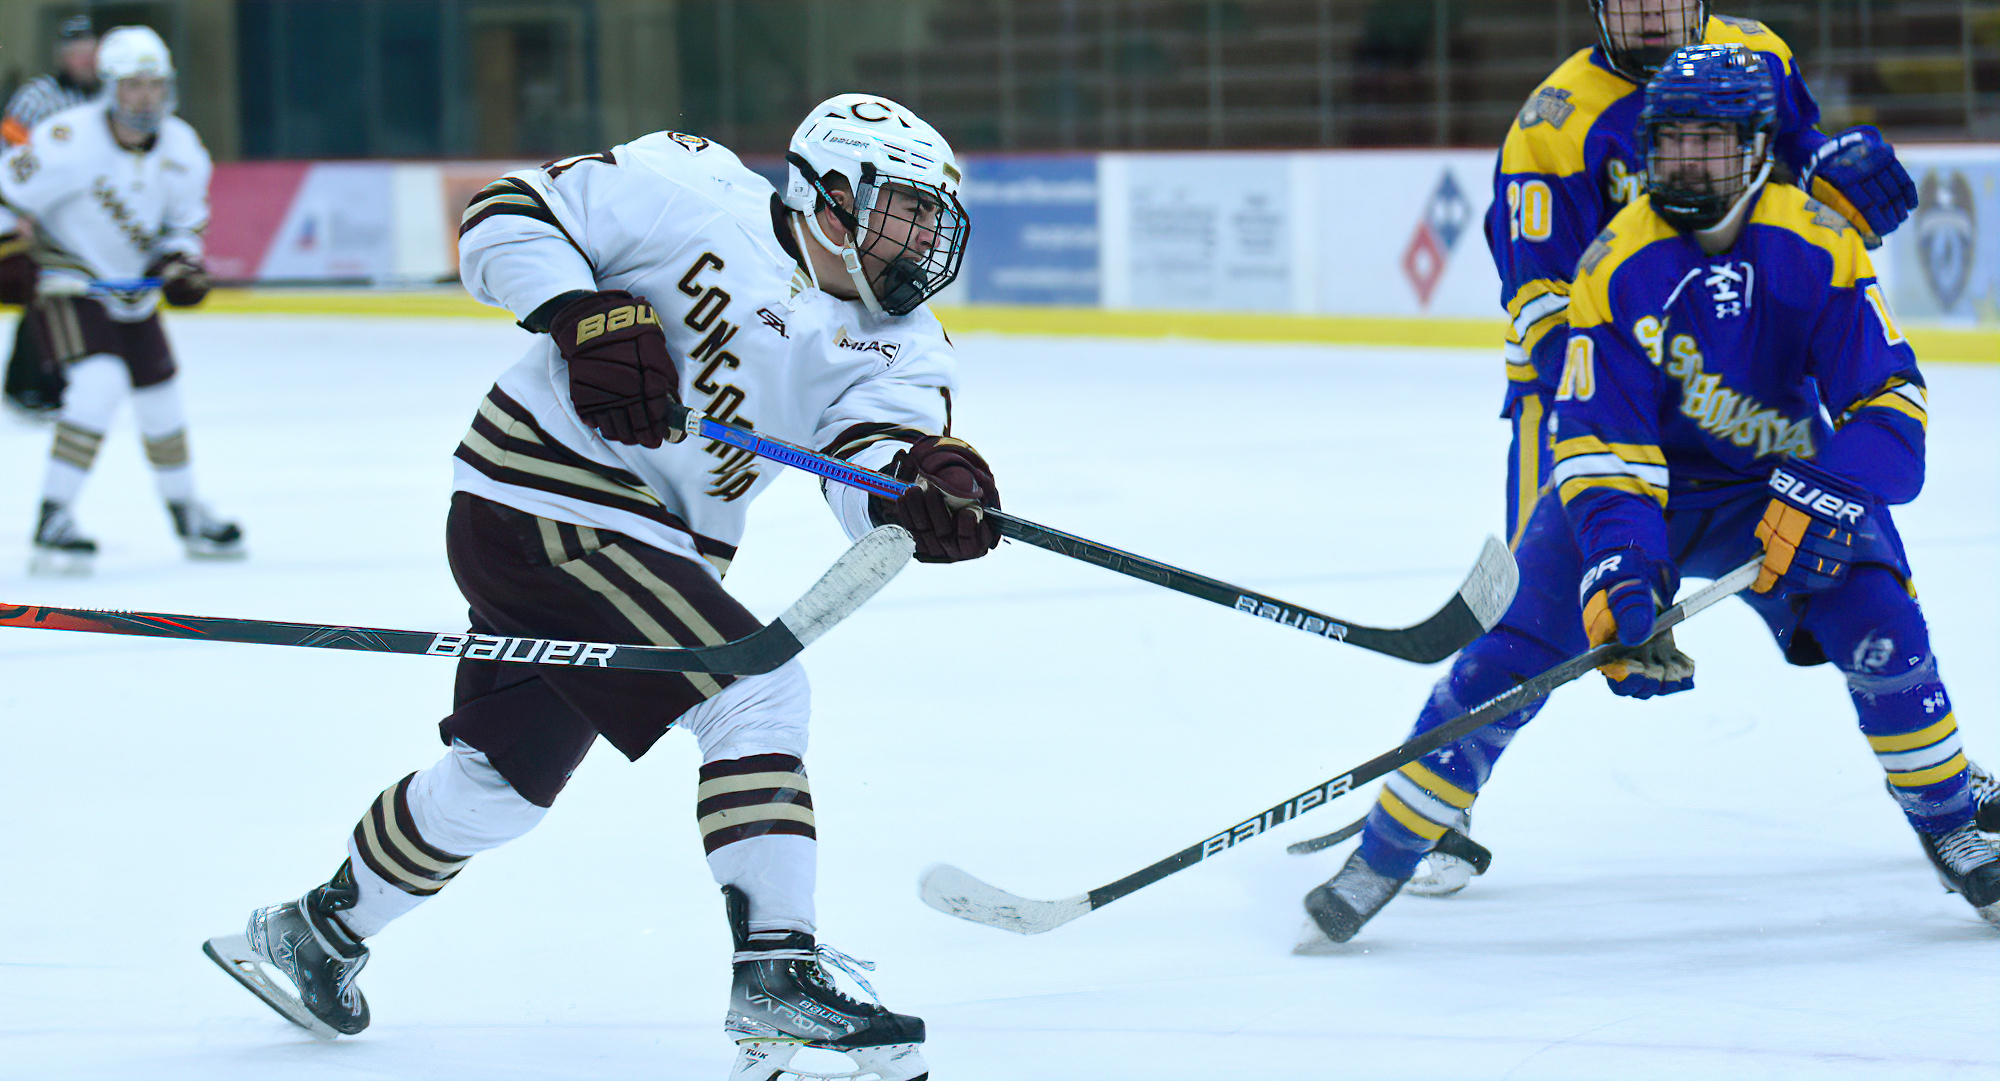 Mason Plante fires a puck on goal during the third period of the Cobbers' 4-1 win over St. Scholastica. Plante had two goals and an assist in the game.